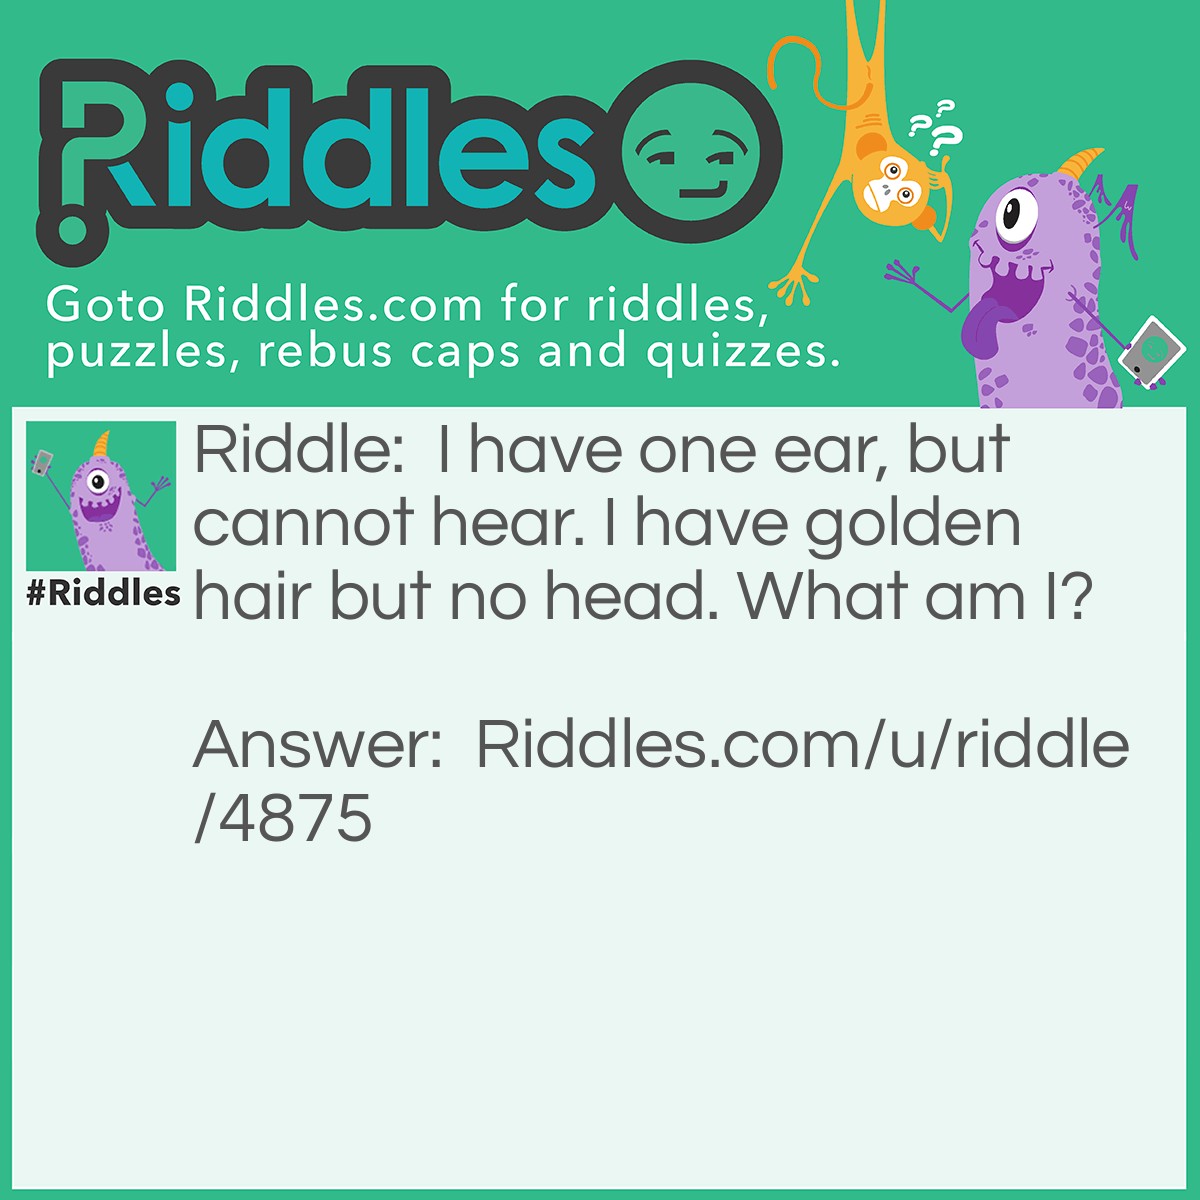 Riddle: I have one ear, but cannot hear. I have golden hair but no head. What am I? Answer: Corn.